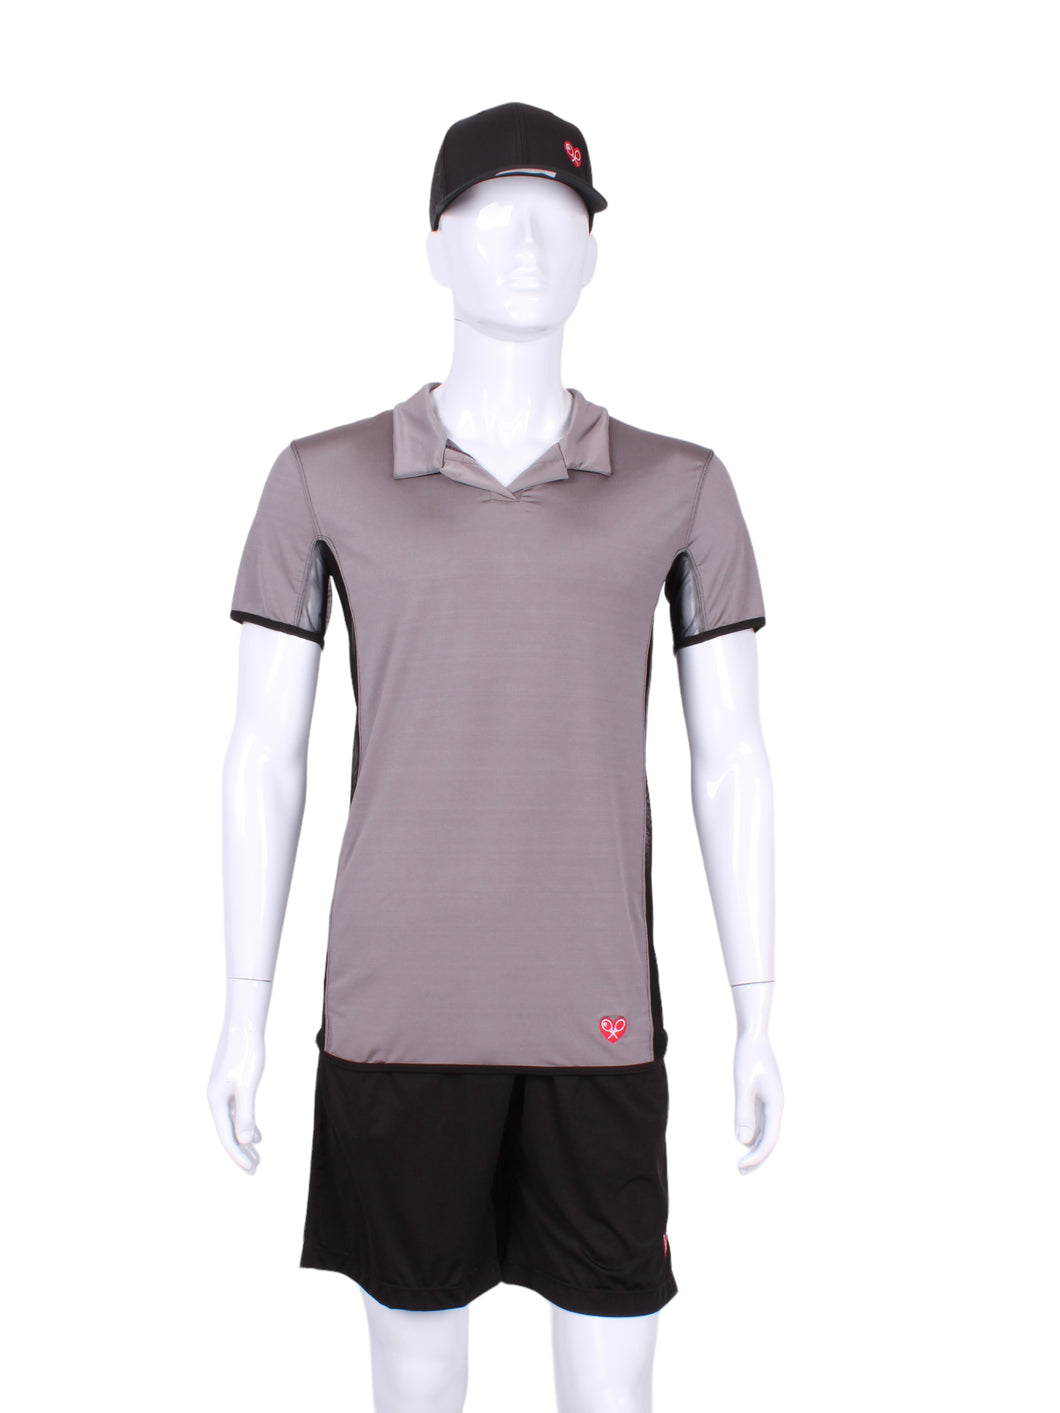 The luxury tennis Men's Polo Shirt in Grey With Mesh is a high-end athletic apparel piece designed for tennis enthusiasts who prioritize both style and performance. 